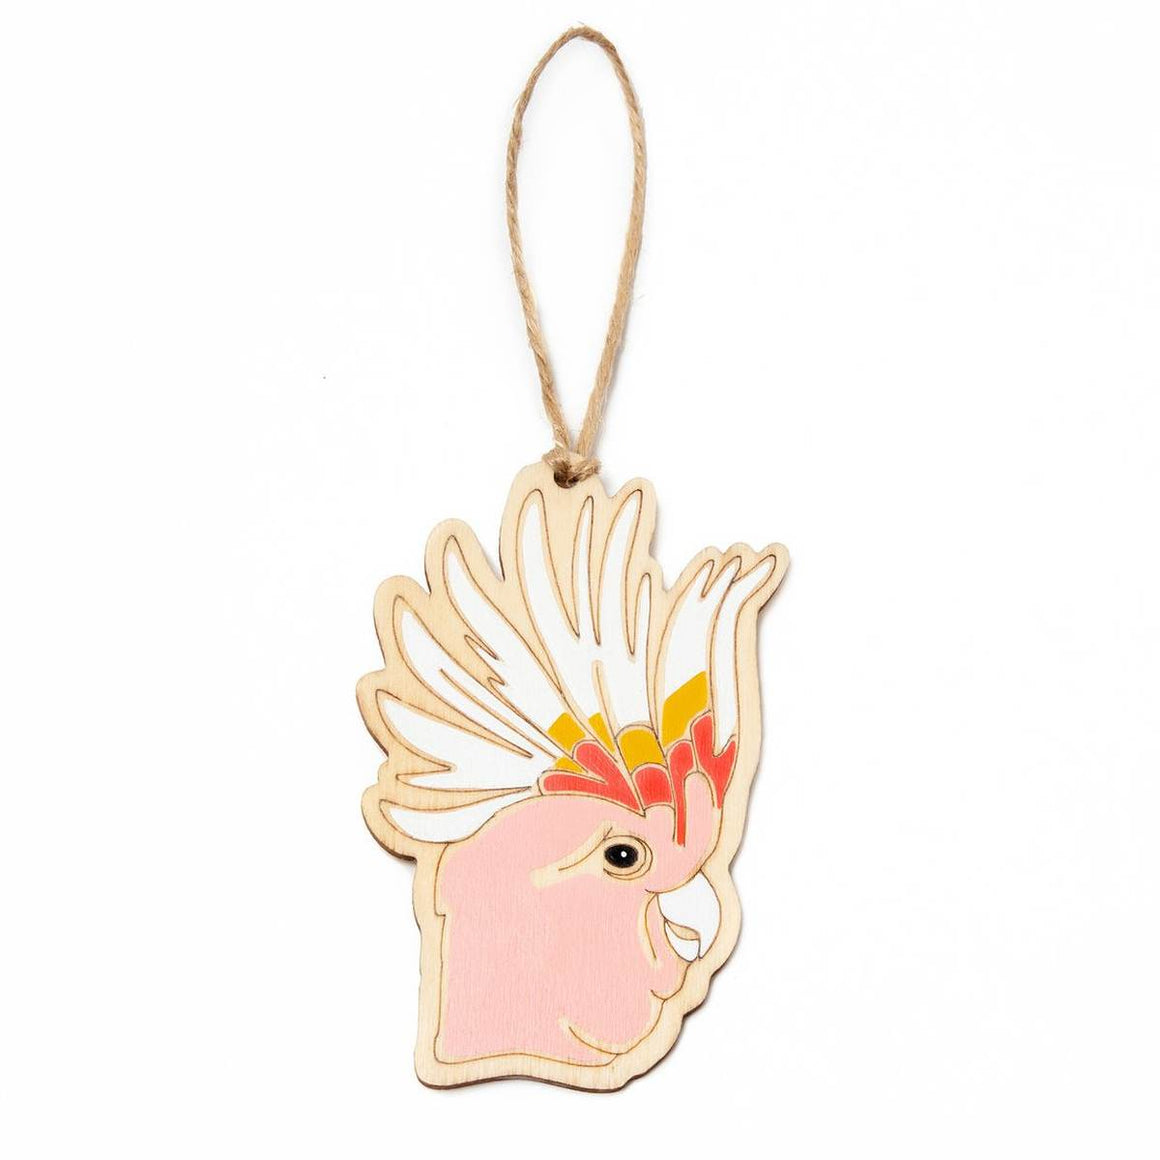 A hanging ornament in the form of a Major Mitchell Cockatoo. Laser Etched flat wood is adorned with pinkl, red, orange, white and black hand painting. A Jute string is attached